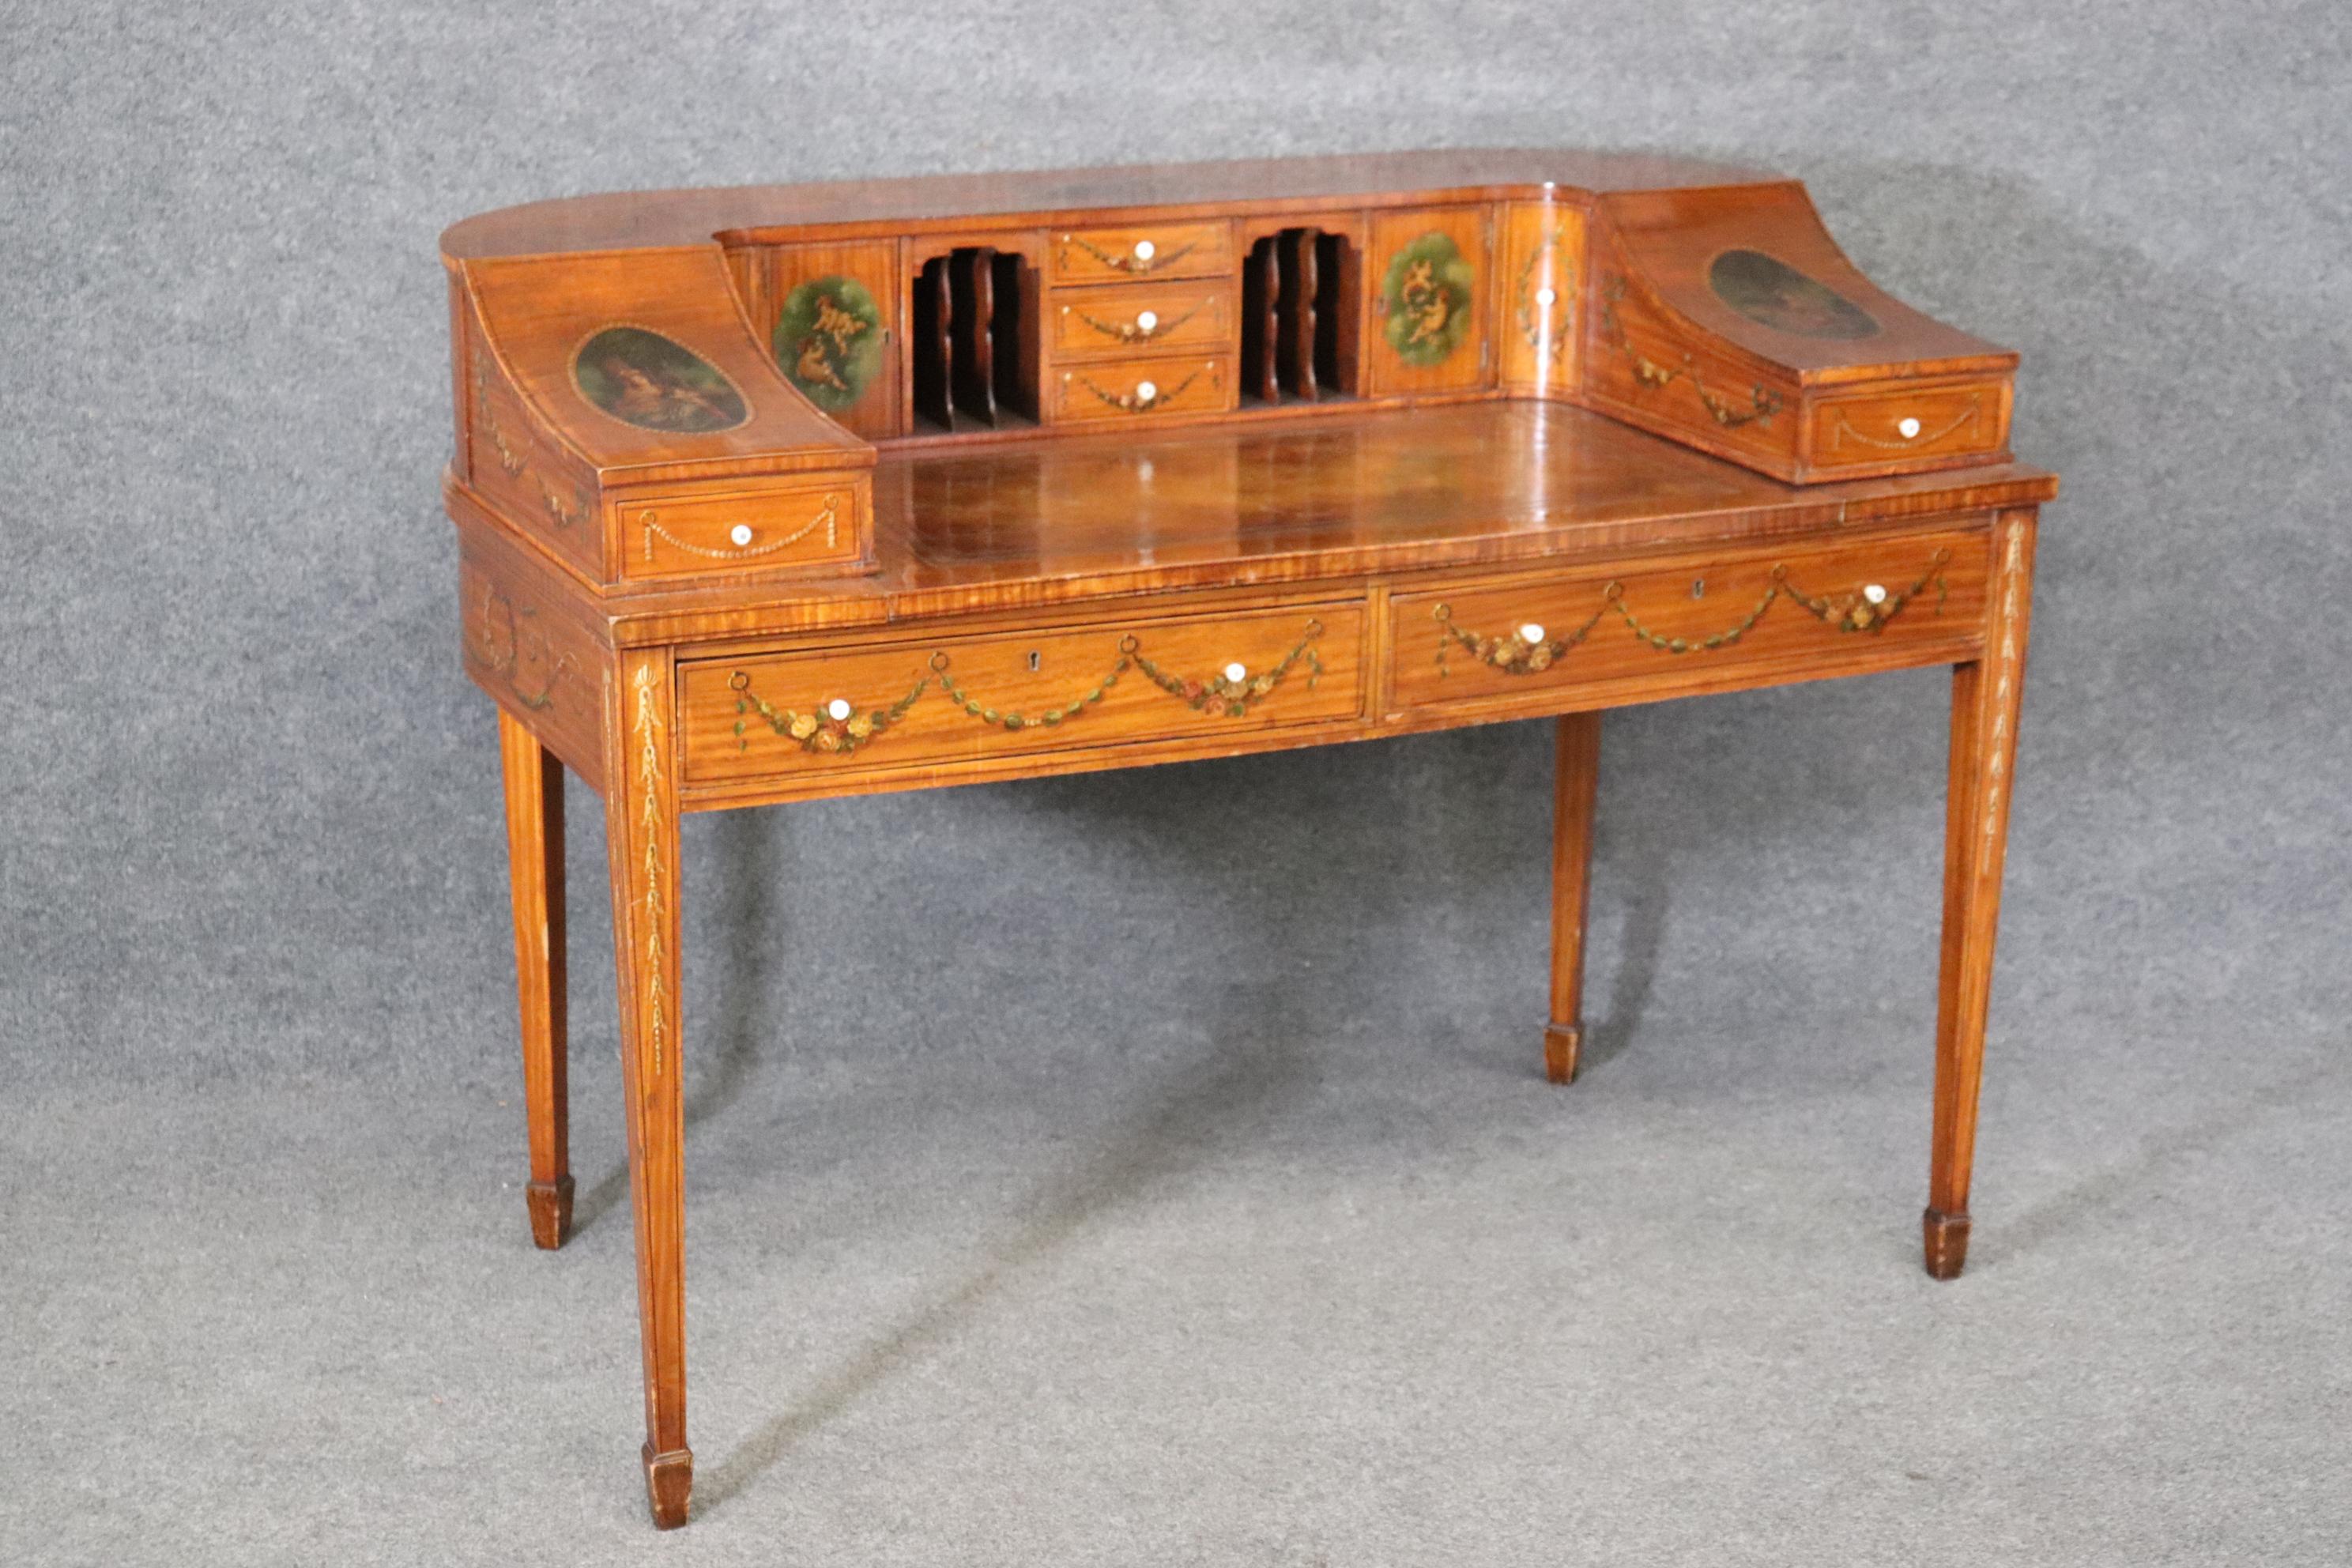 This is a spectacular hand-paint decorated satinwood Carlton House desk with beautifully painted cherubs and musical instruments, flowers and figures. The desk is in its original finish with some signs of age and use including minor losses to the